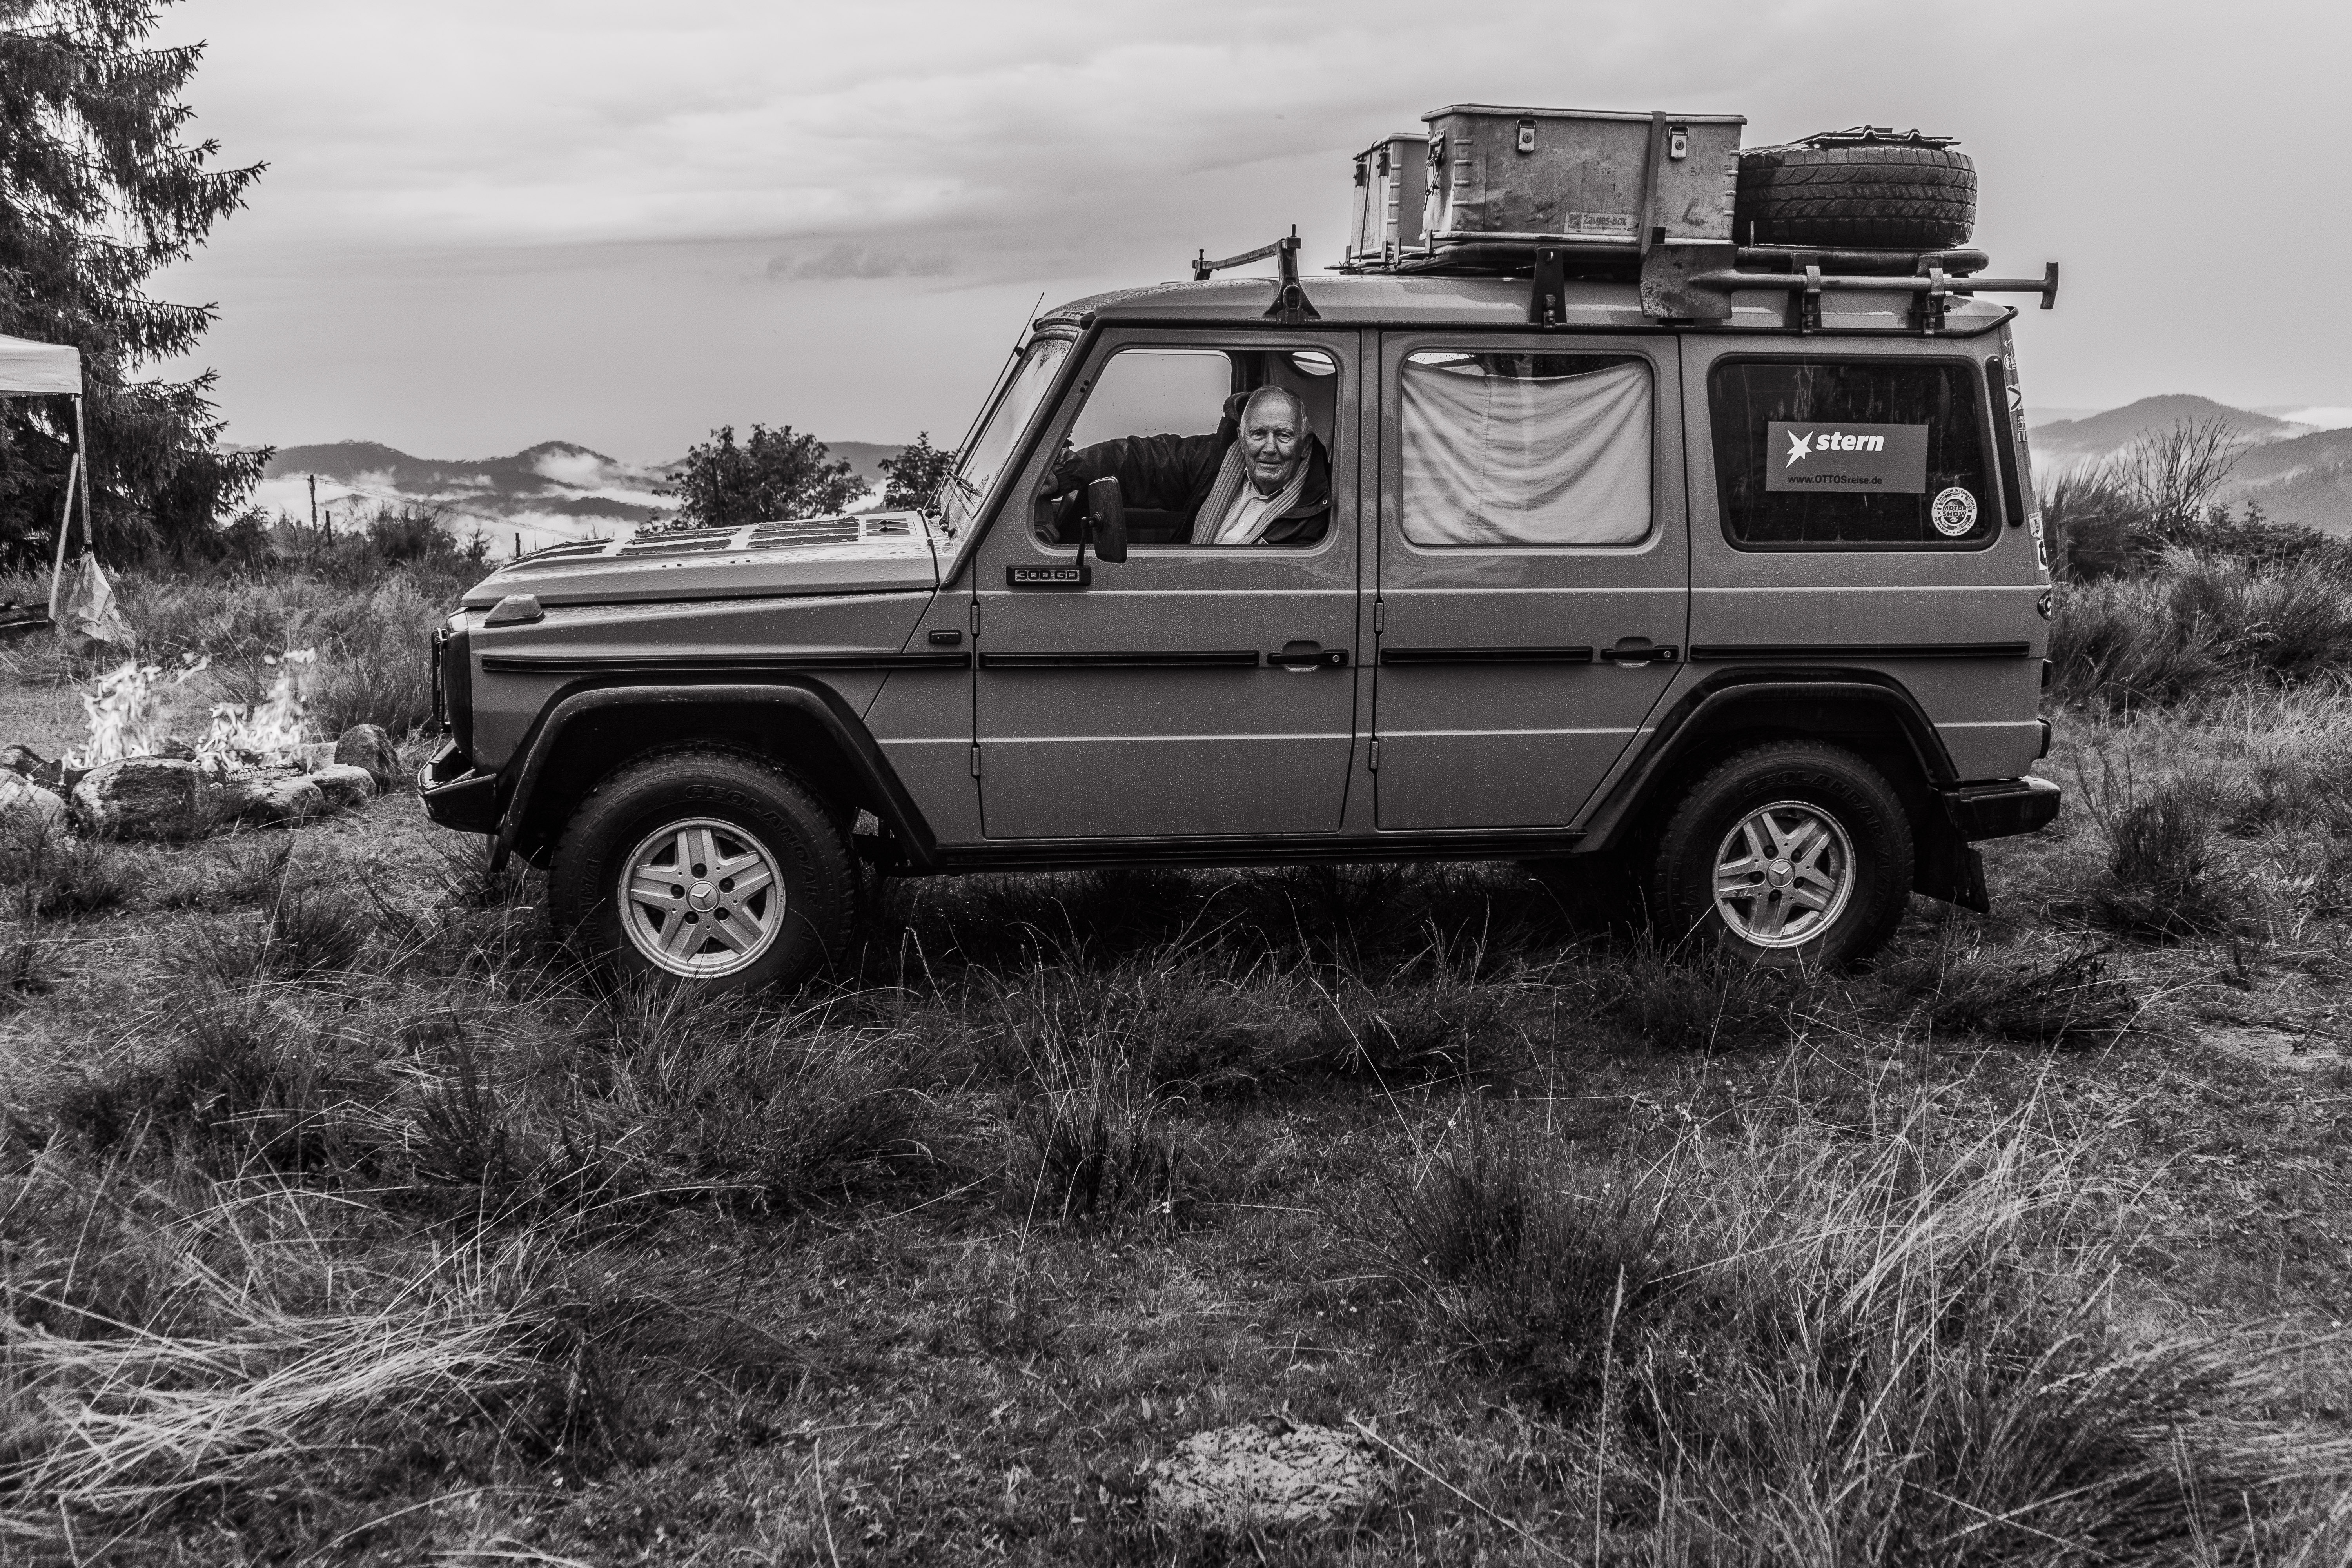 We realize the need for vehicles in our daily lives as well as for global adventures but we always want to find out more. Photo: Apoorva Prasad/ The Outdoor Journal